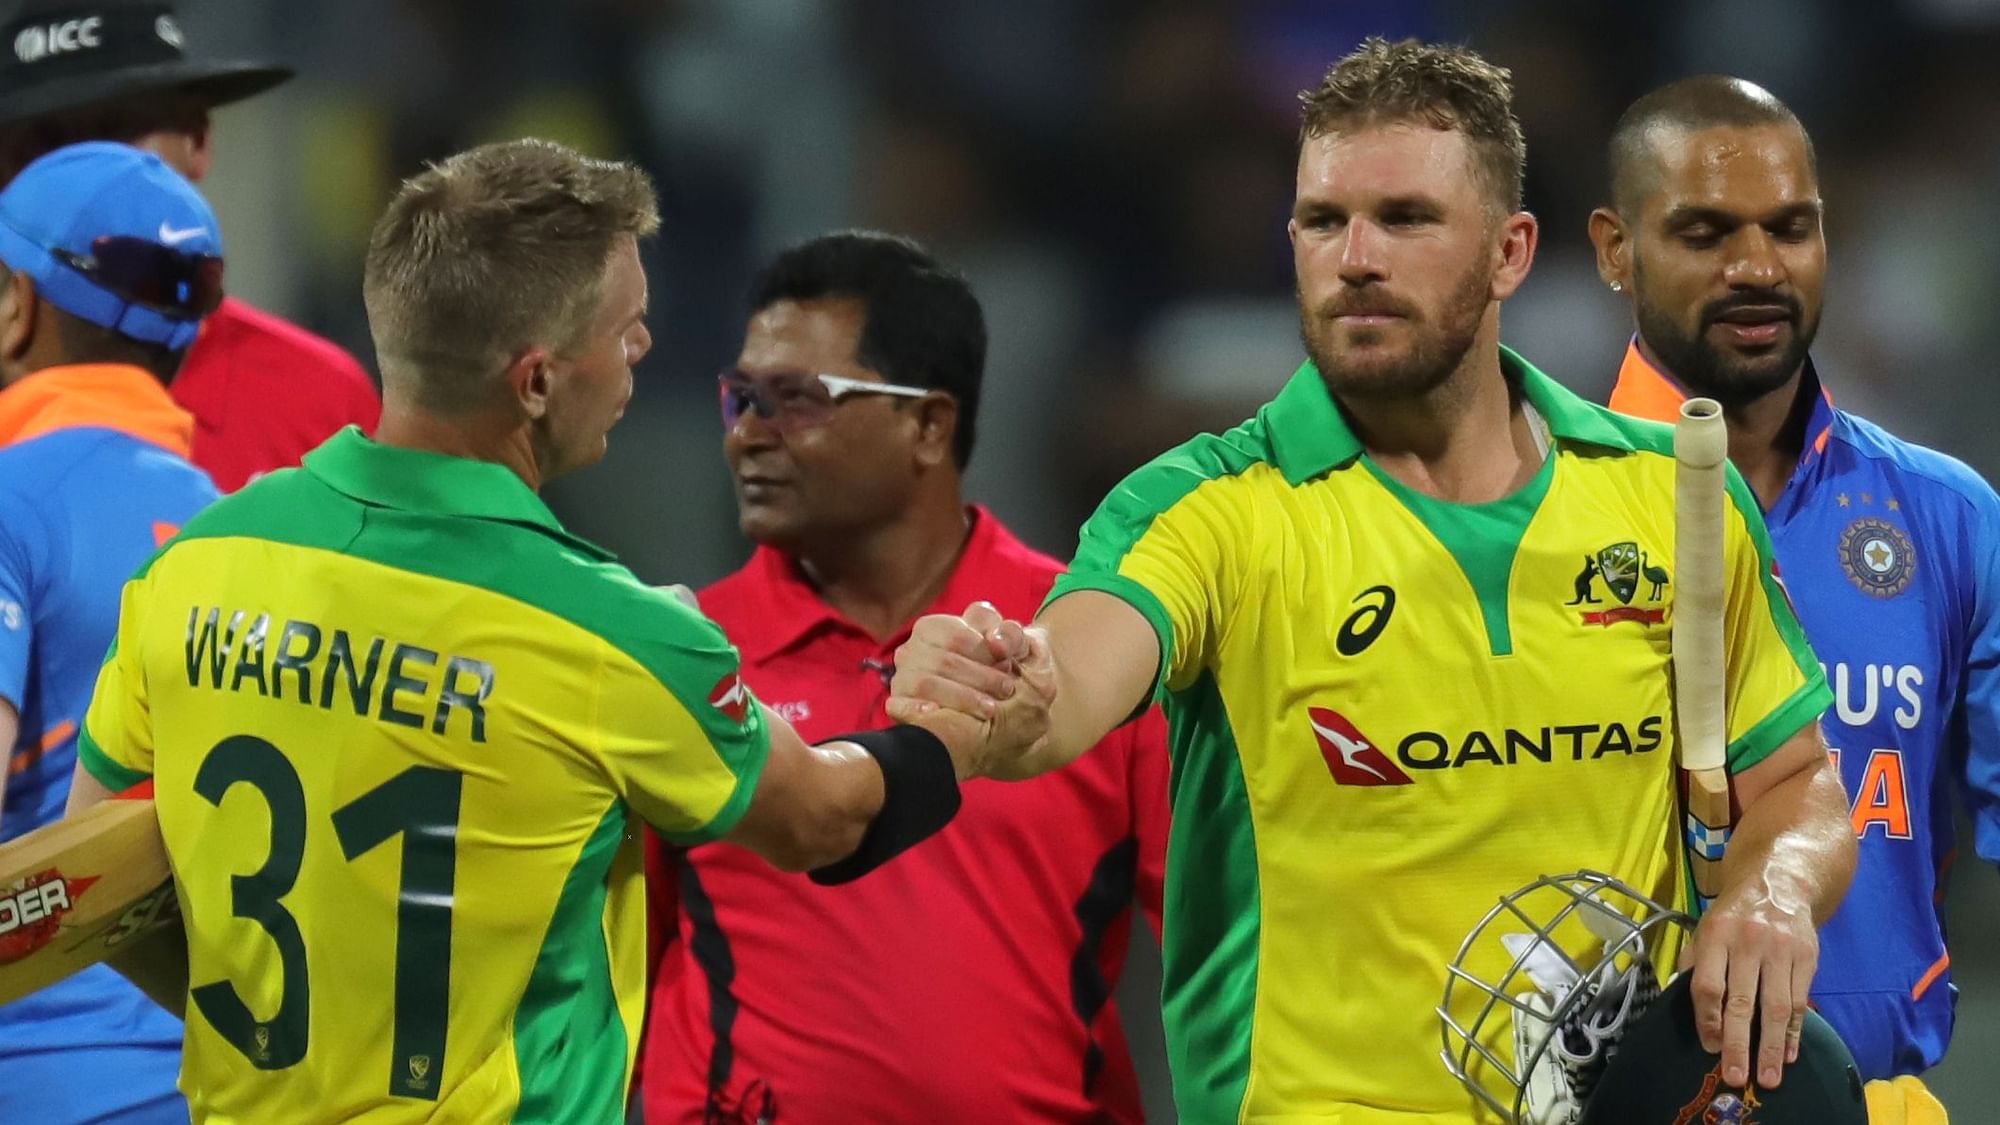 David Warner and Aaron Finch have been challenging each other in TikTok videos.